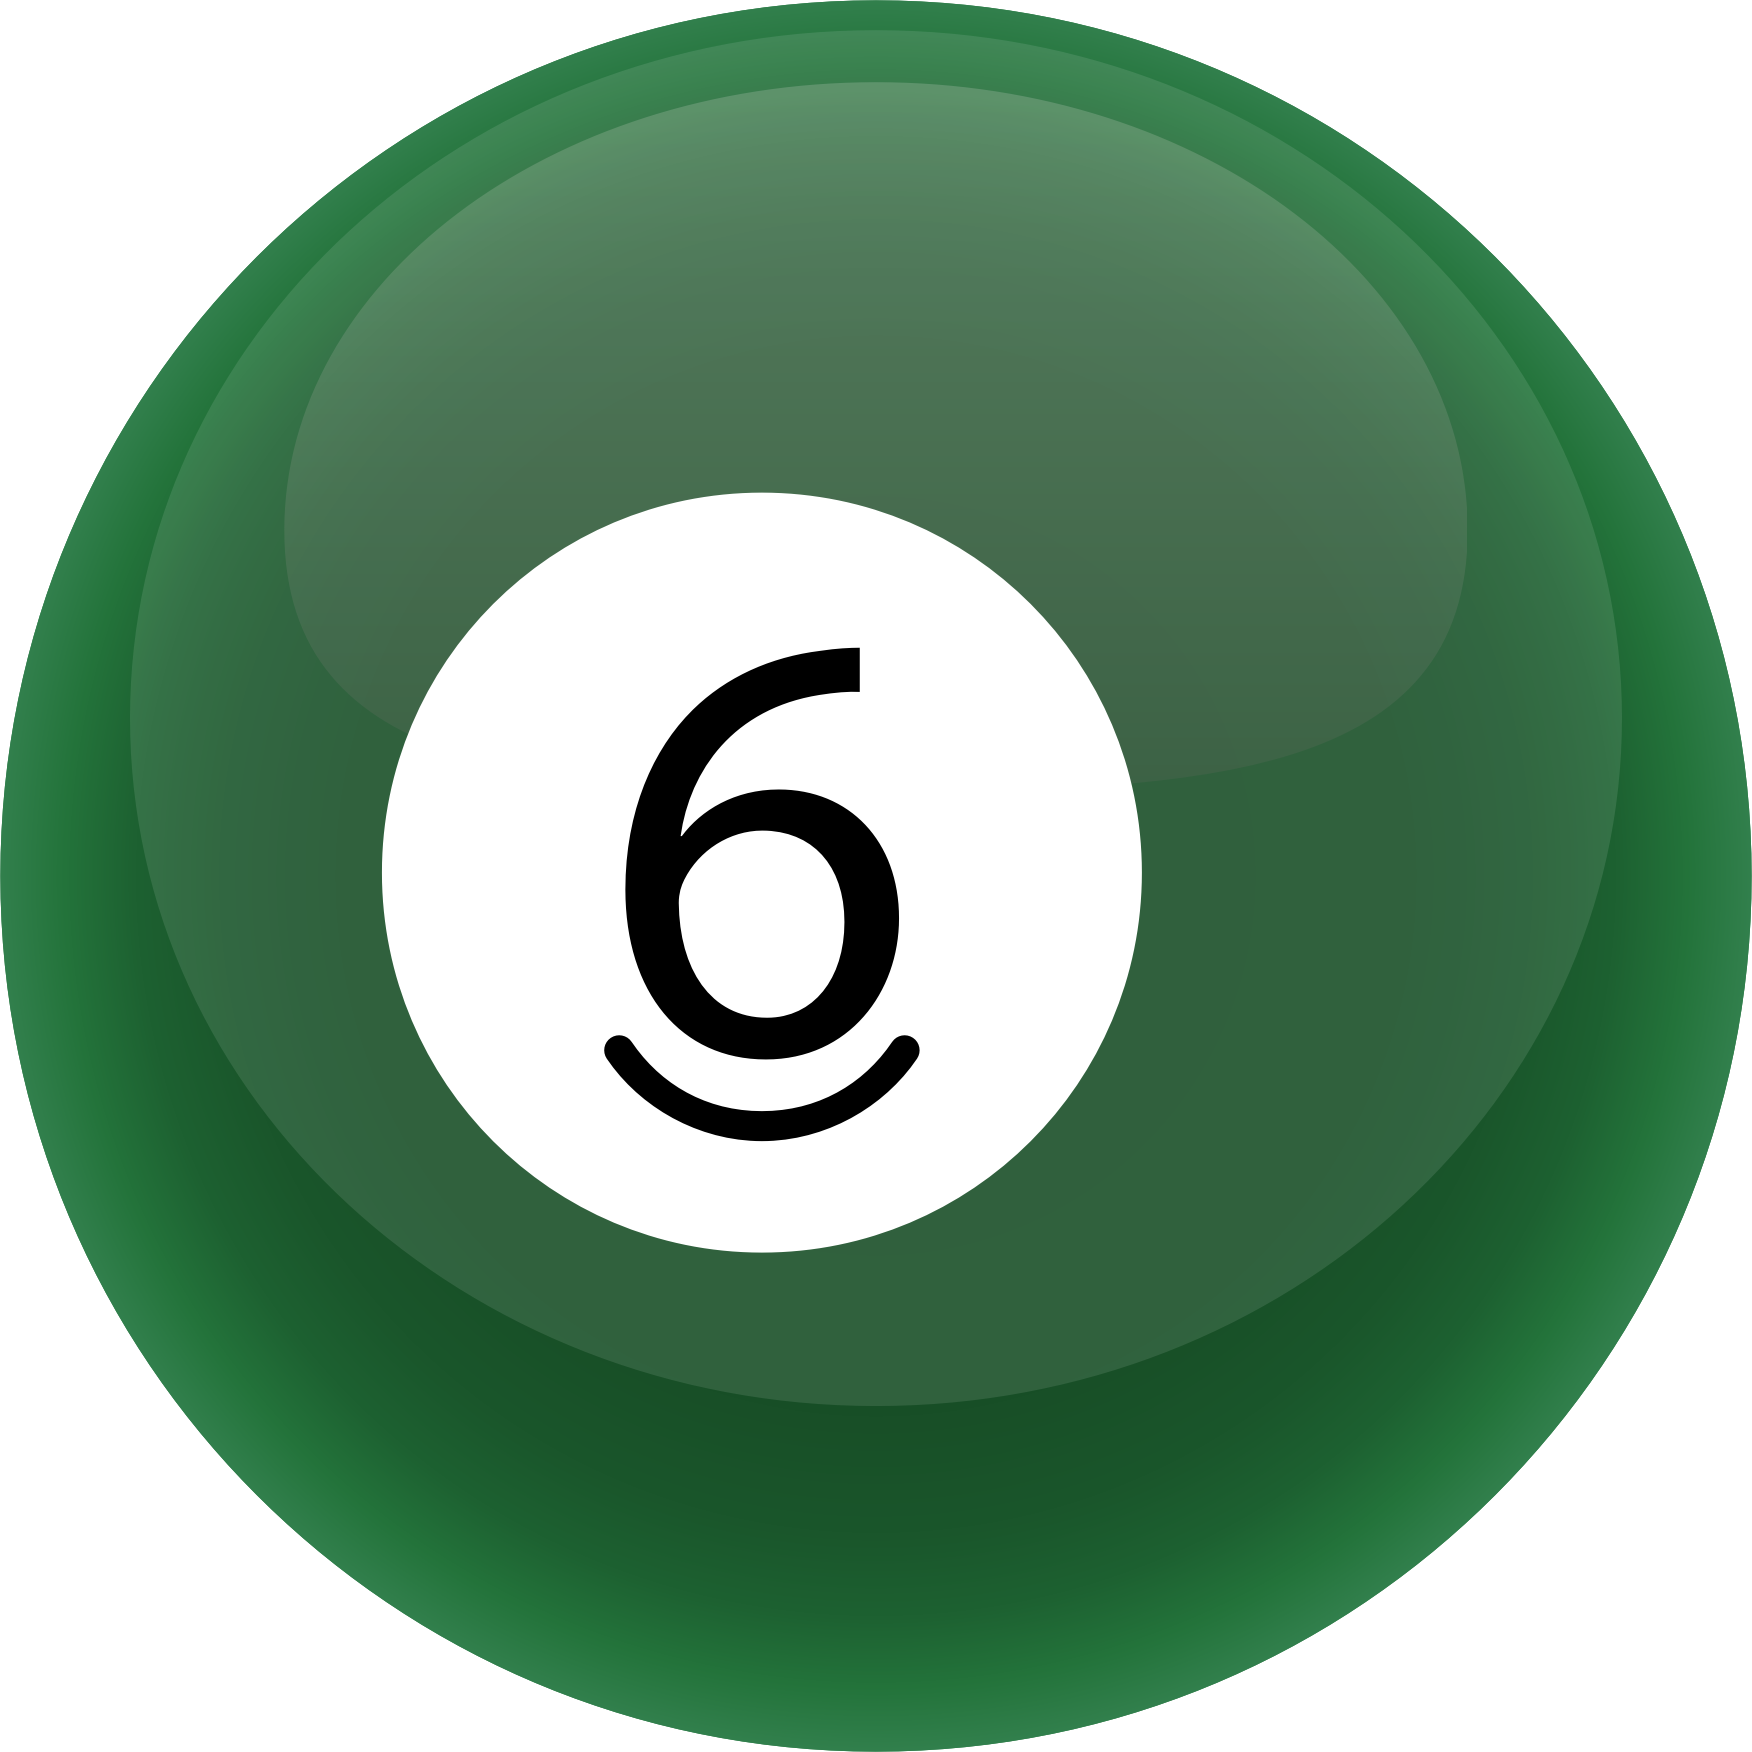 Billiard Ball PNG Pic Background